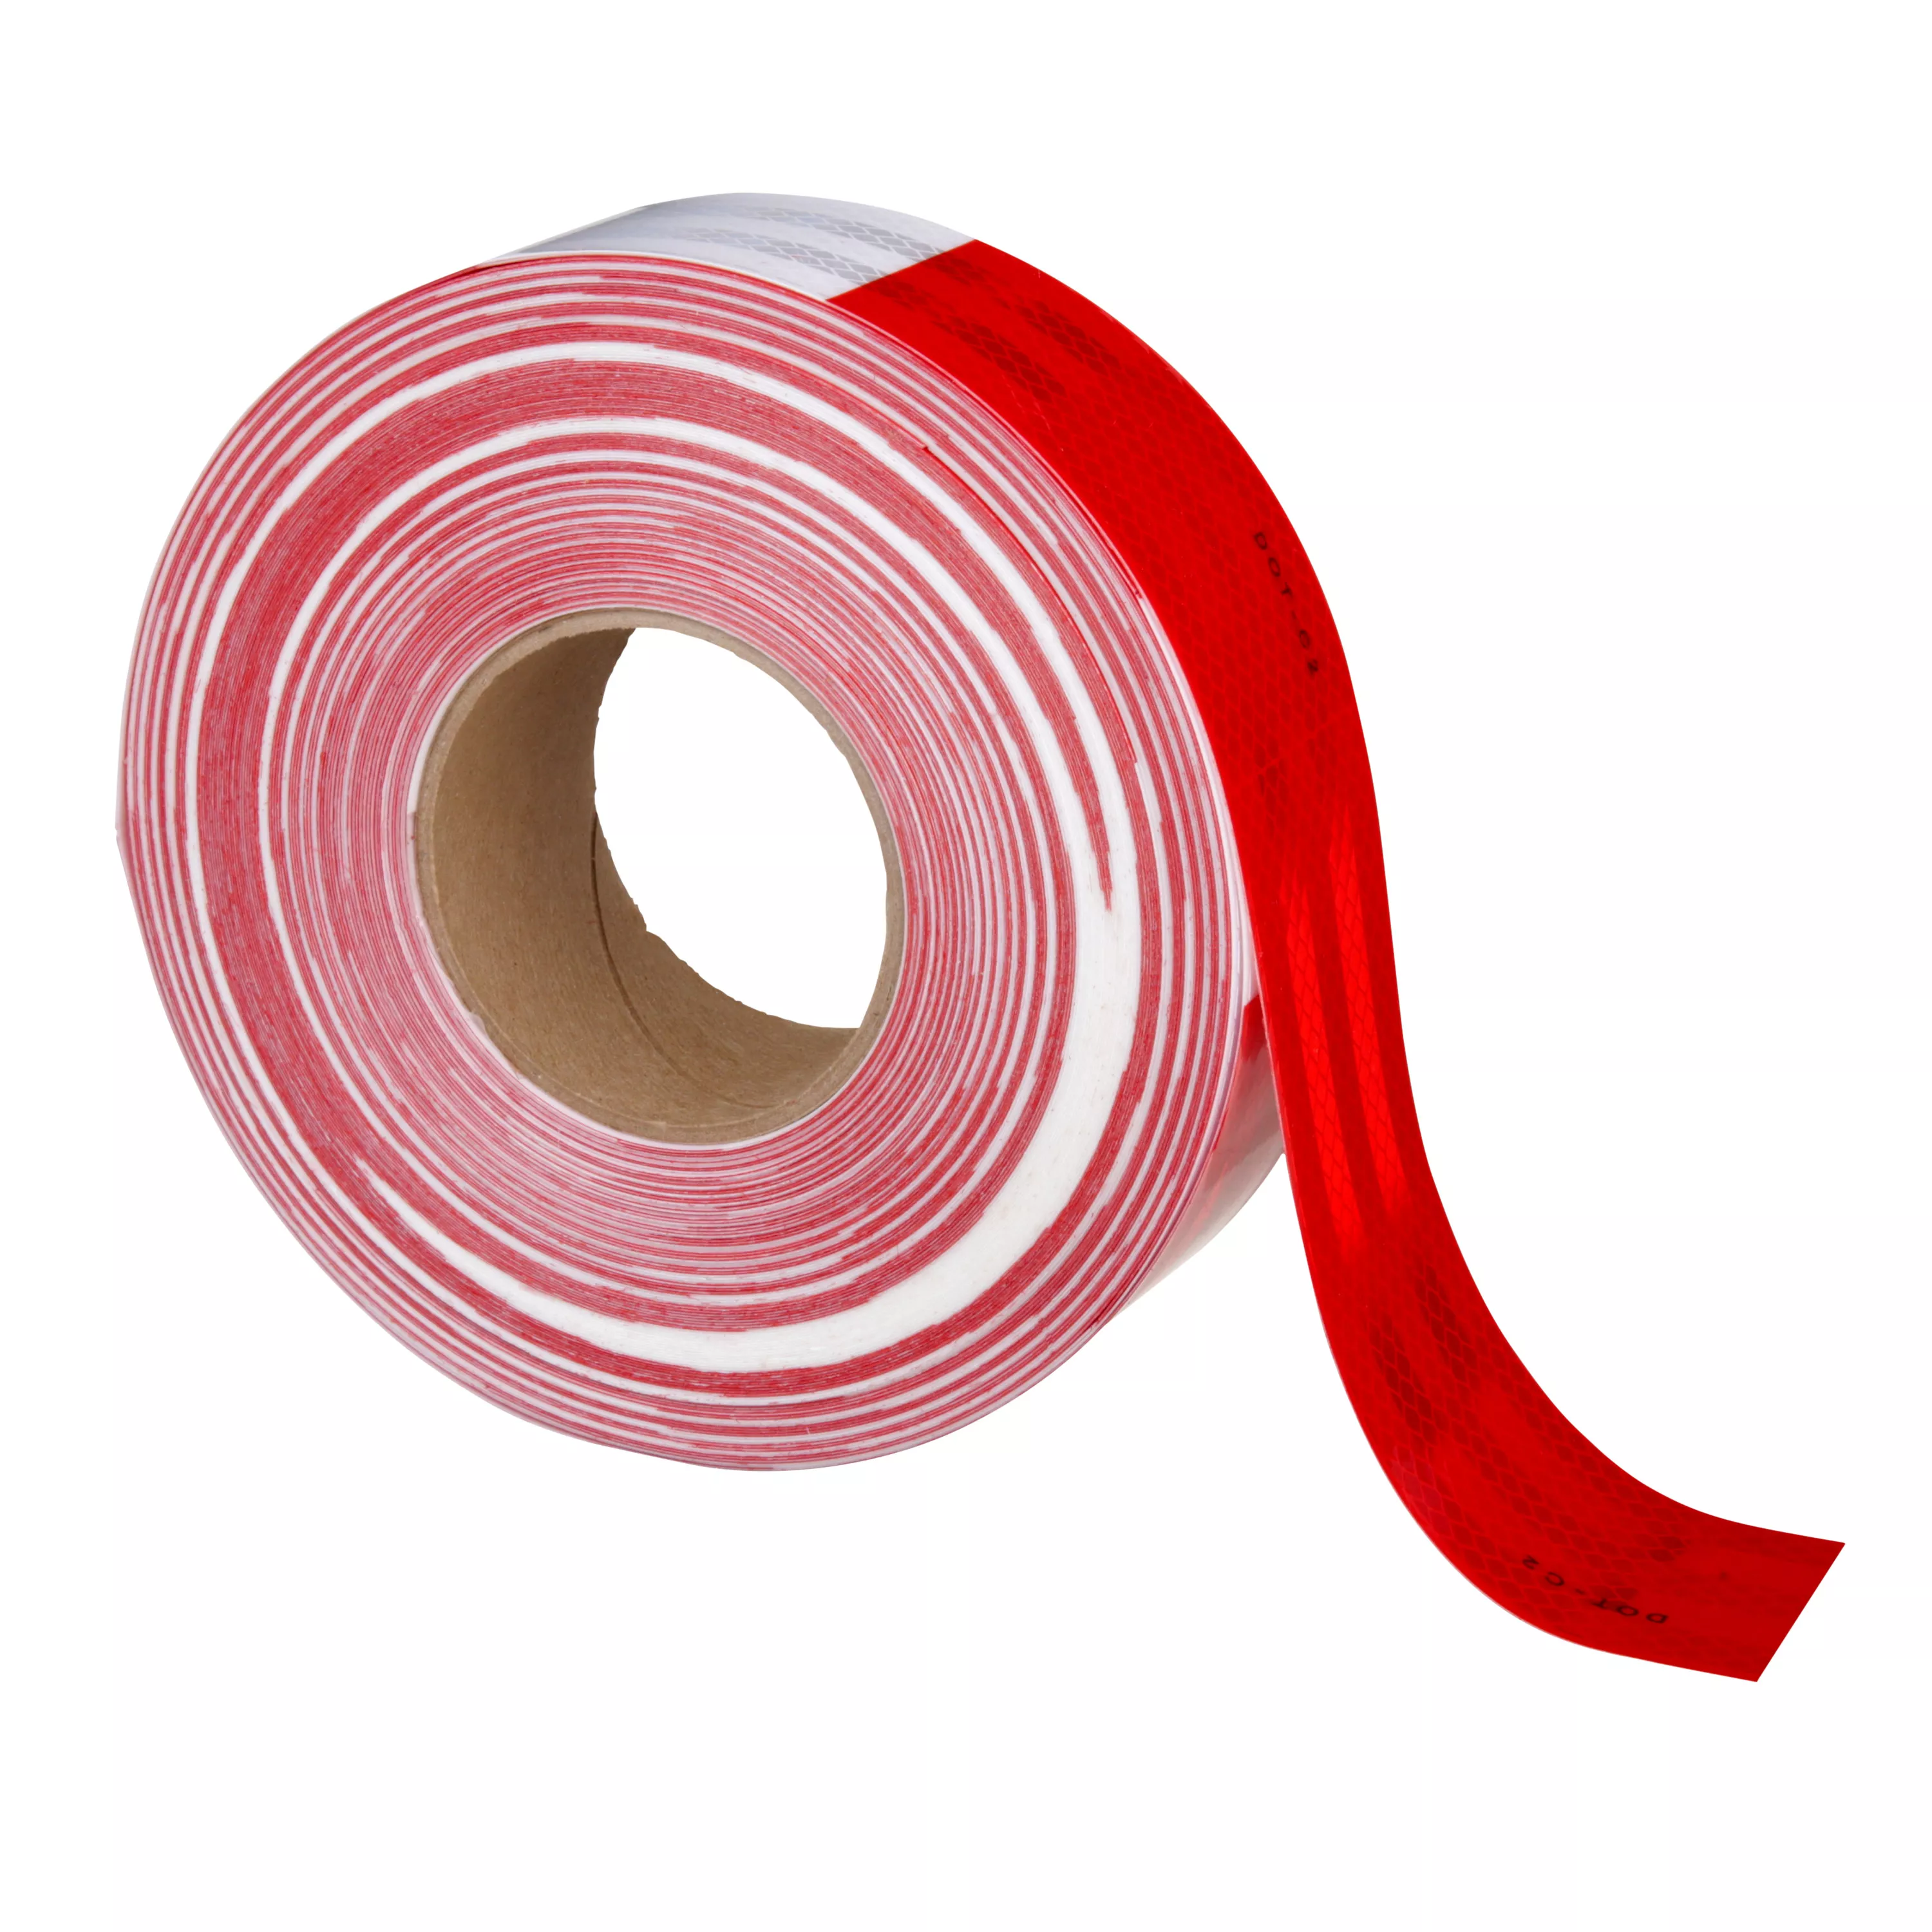 3M™ Diamond Grade™ Conspicuity Markings 983-32, Red/White, 67636, 2 in x
50 yd, kiss-cut every 18 in